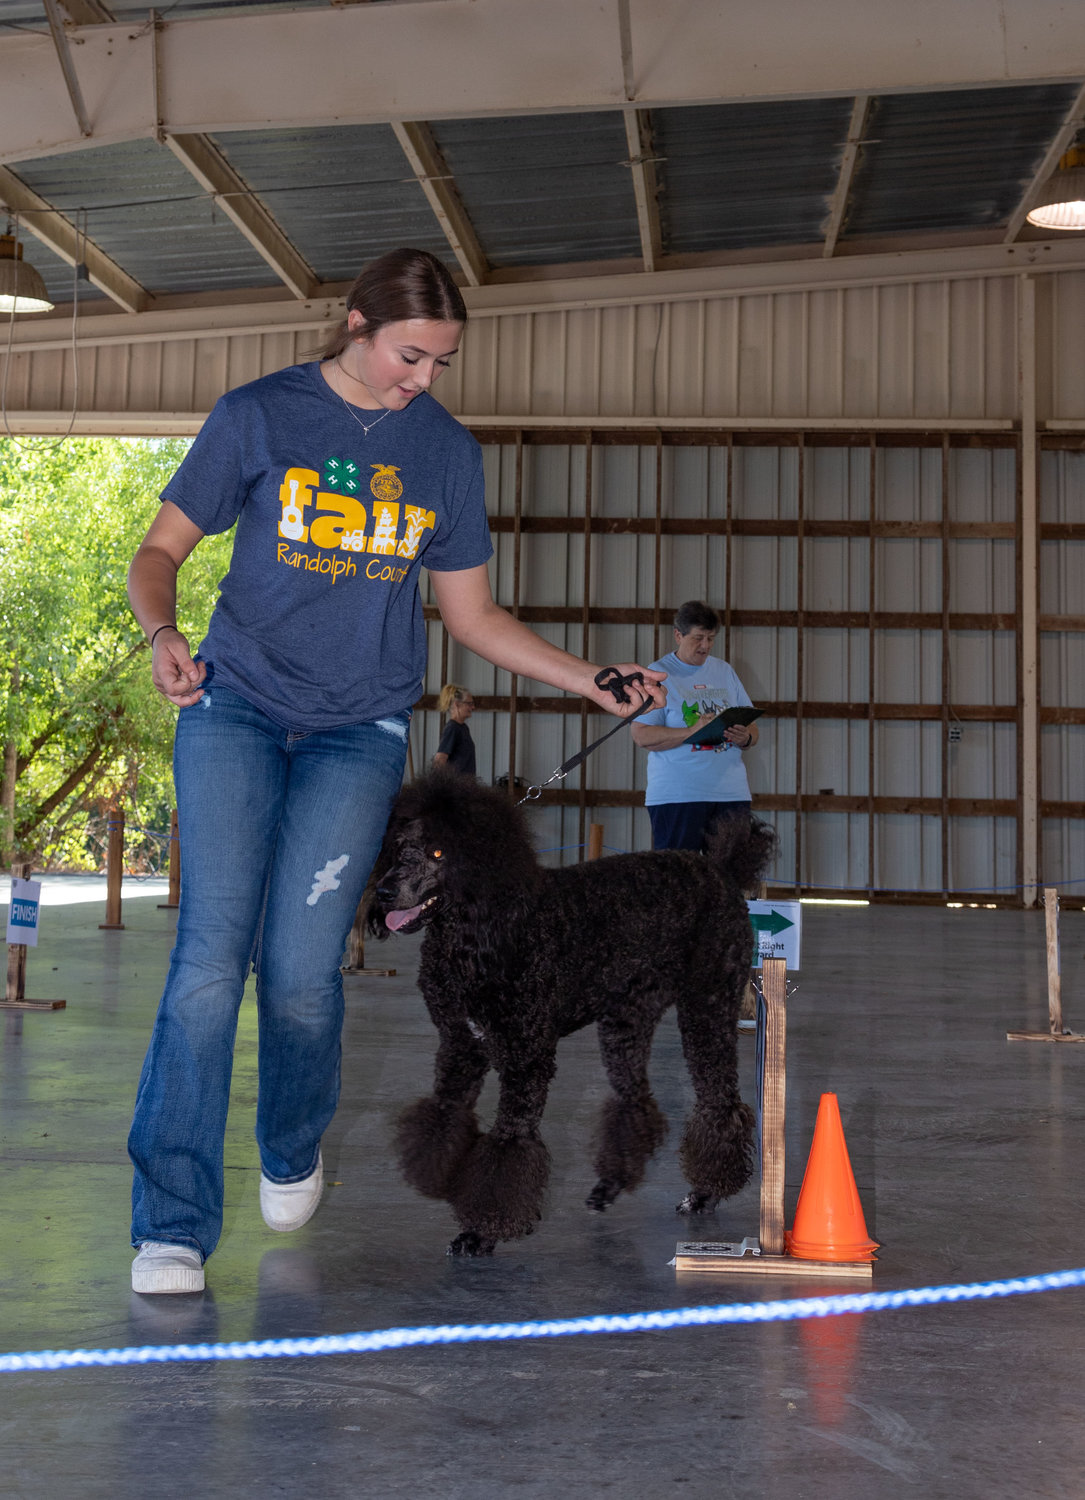 Alexandra Lucas, of Jacksonville, guides Rose through the rally course during the Randolph County Fair dog show Sunday at Riley Pavilion in Rothwell Park.